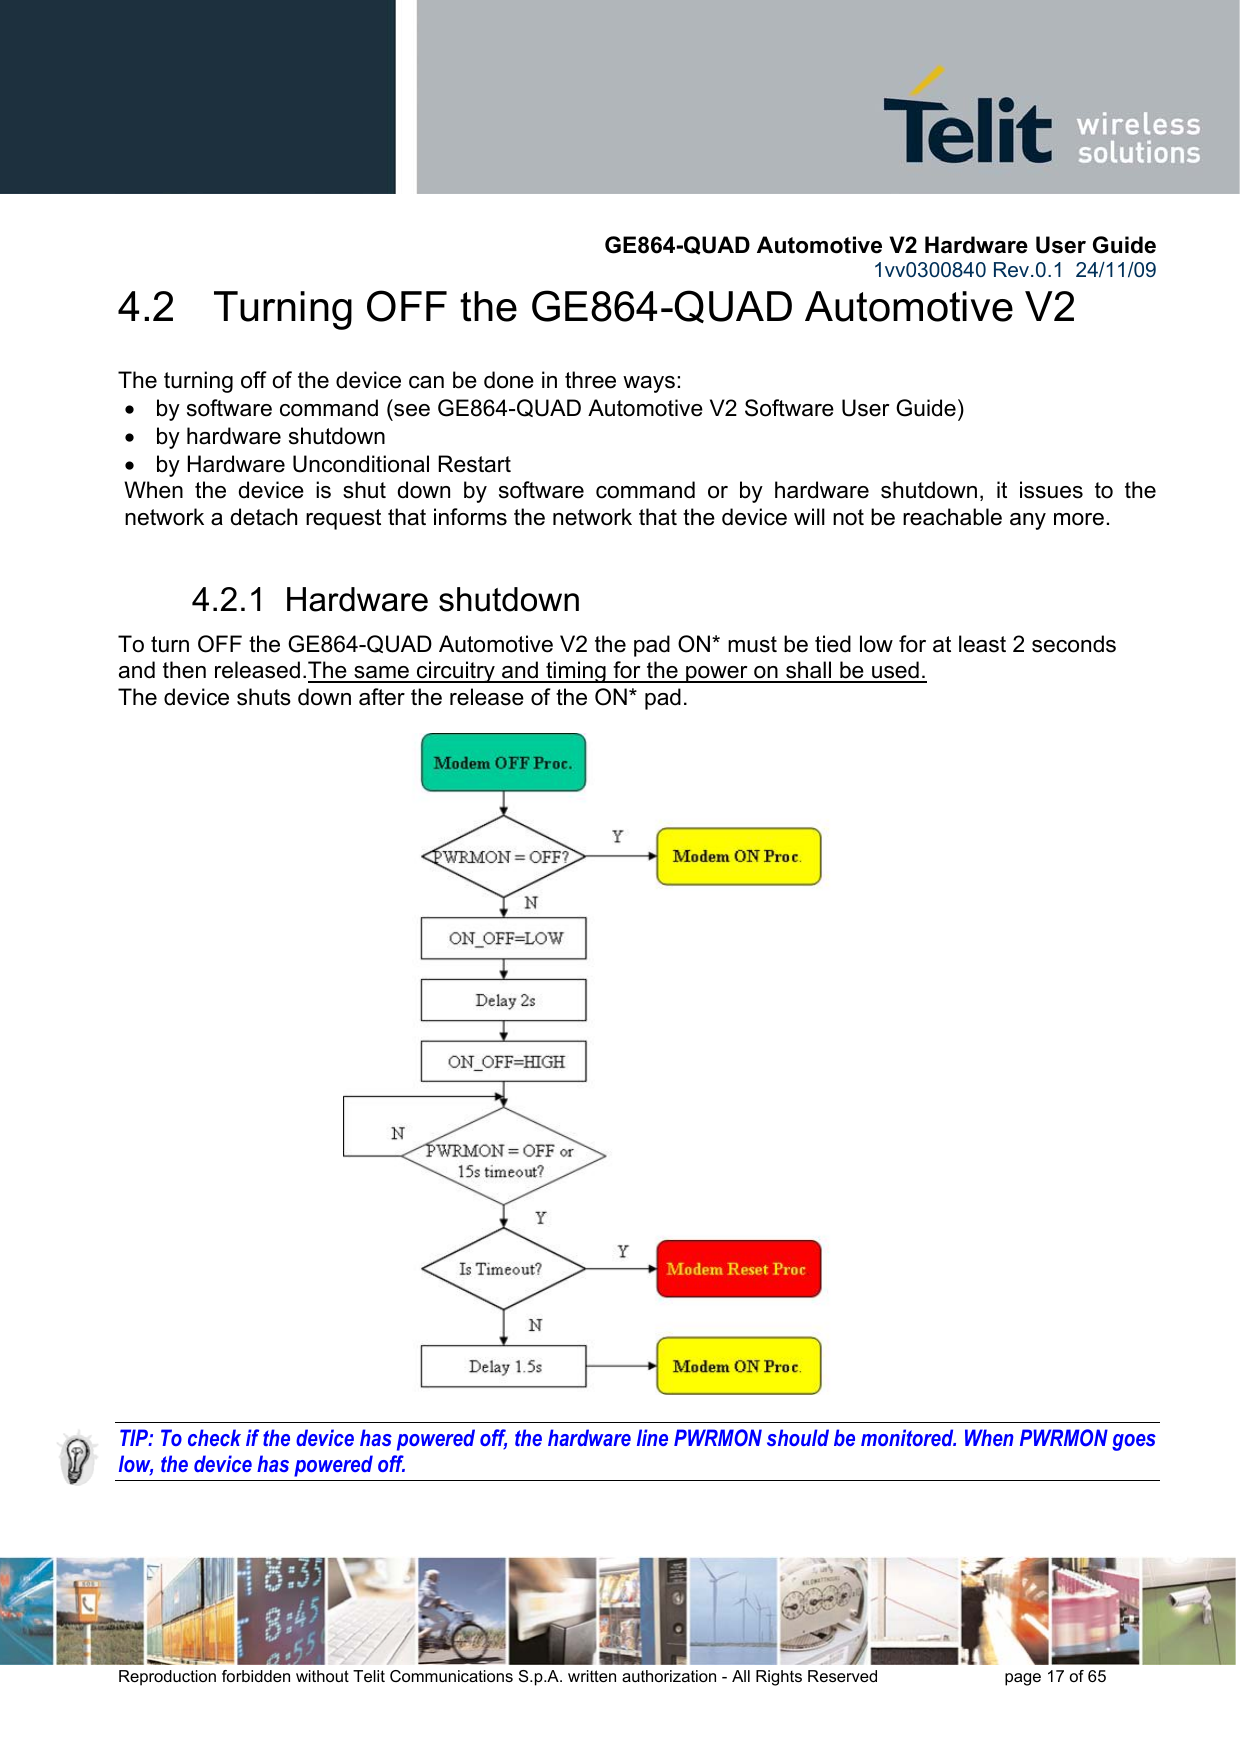       GE864-QUAD Automotive V2 Hardware User Guide 1vv0300840 Rev.0.1  24/11/09      Reproduction forbidden without Telit Communications S.p.A. written authorization - All Rights Reserved    page 17 of 65  4.2   Turning OFF the GE864-QUAD Automotive V2 The turning off of the device can be done in three ways: •  by software command (see GE864-QUAD Automotive V2 Software User Guide) •  by hardware shutdown •  by Hardware Unconditional Restart When the device is shut down by software command or by hardware shutdown, it issues to the network a detach request that informs the network that the device will not be reachable any more.  4.2.1  Hardware shutdown To turn OFF the GE864-QUAD Automotive V2 the pad ON* must be tied low for at least 2 seconds and then released.The same circuitry and timing for the power on shall be used. The device shuts down after the release of the ON* pad.                             TIP: To check if the device has powered off, the hardware line PWRMON should be monitored. When PWRMON goes low, the device has powered off.  